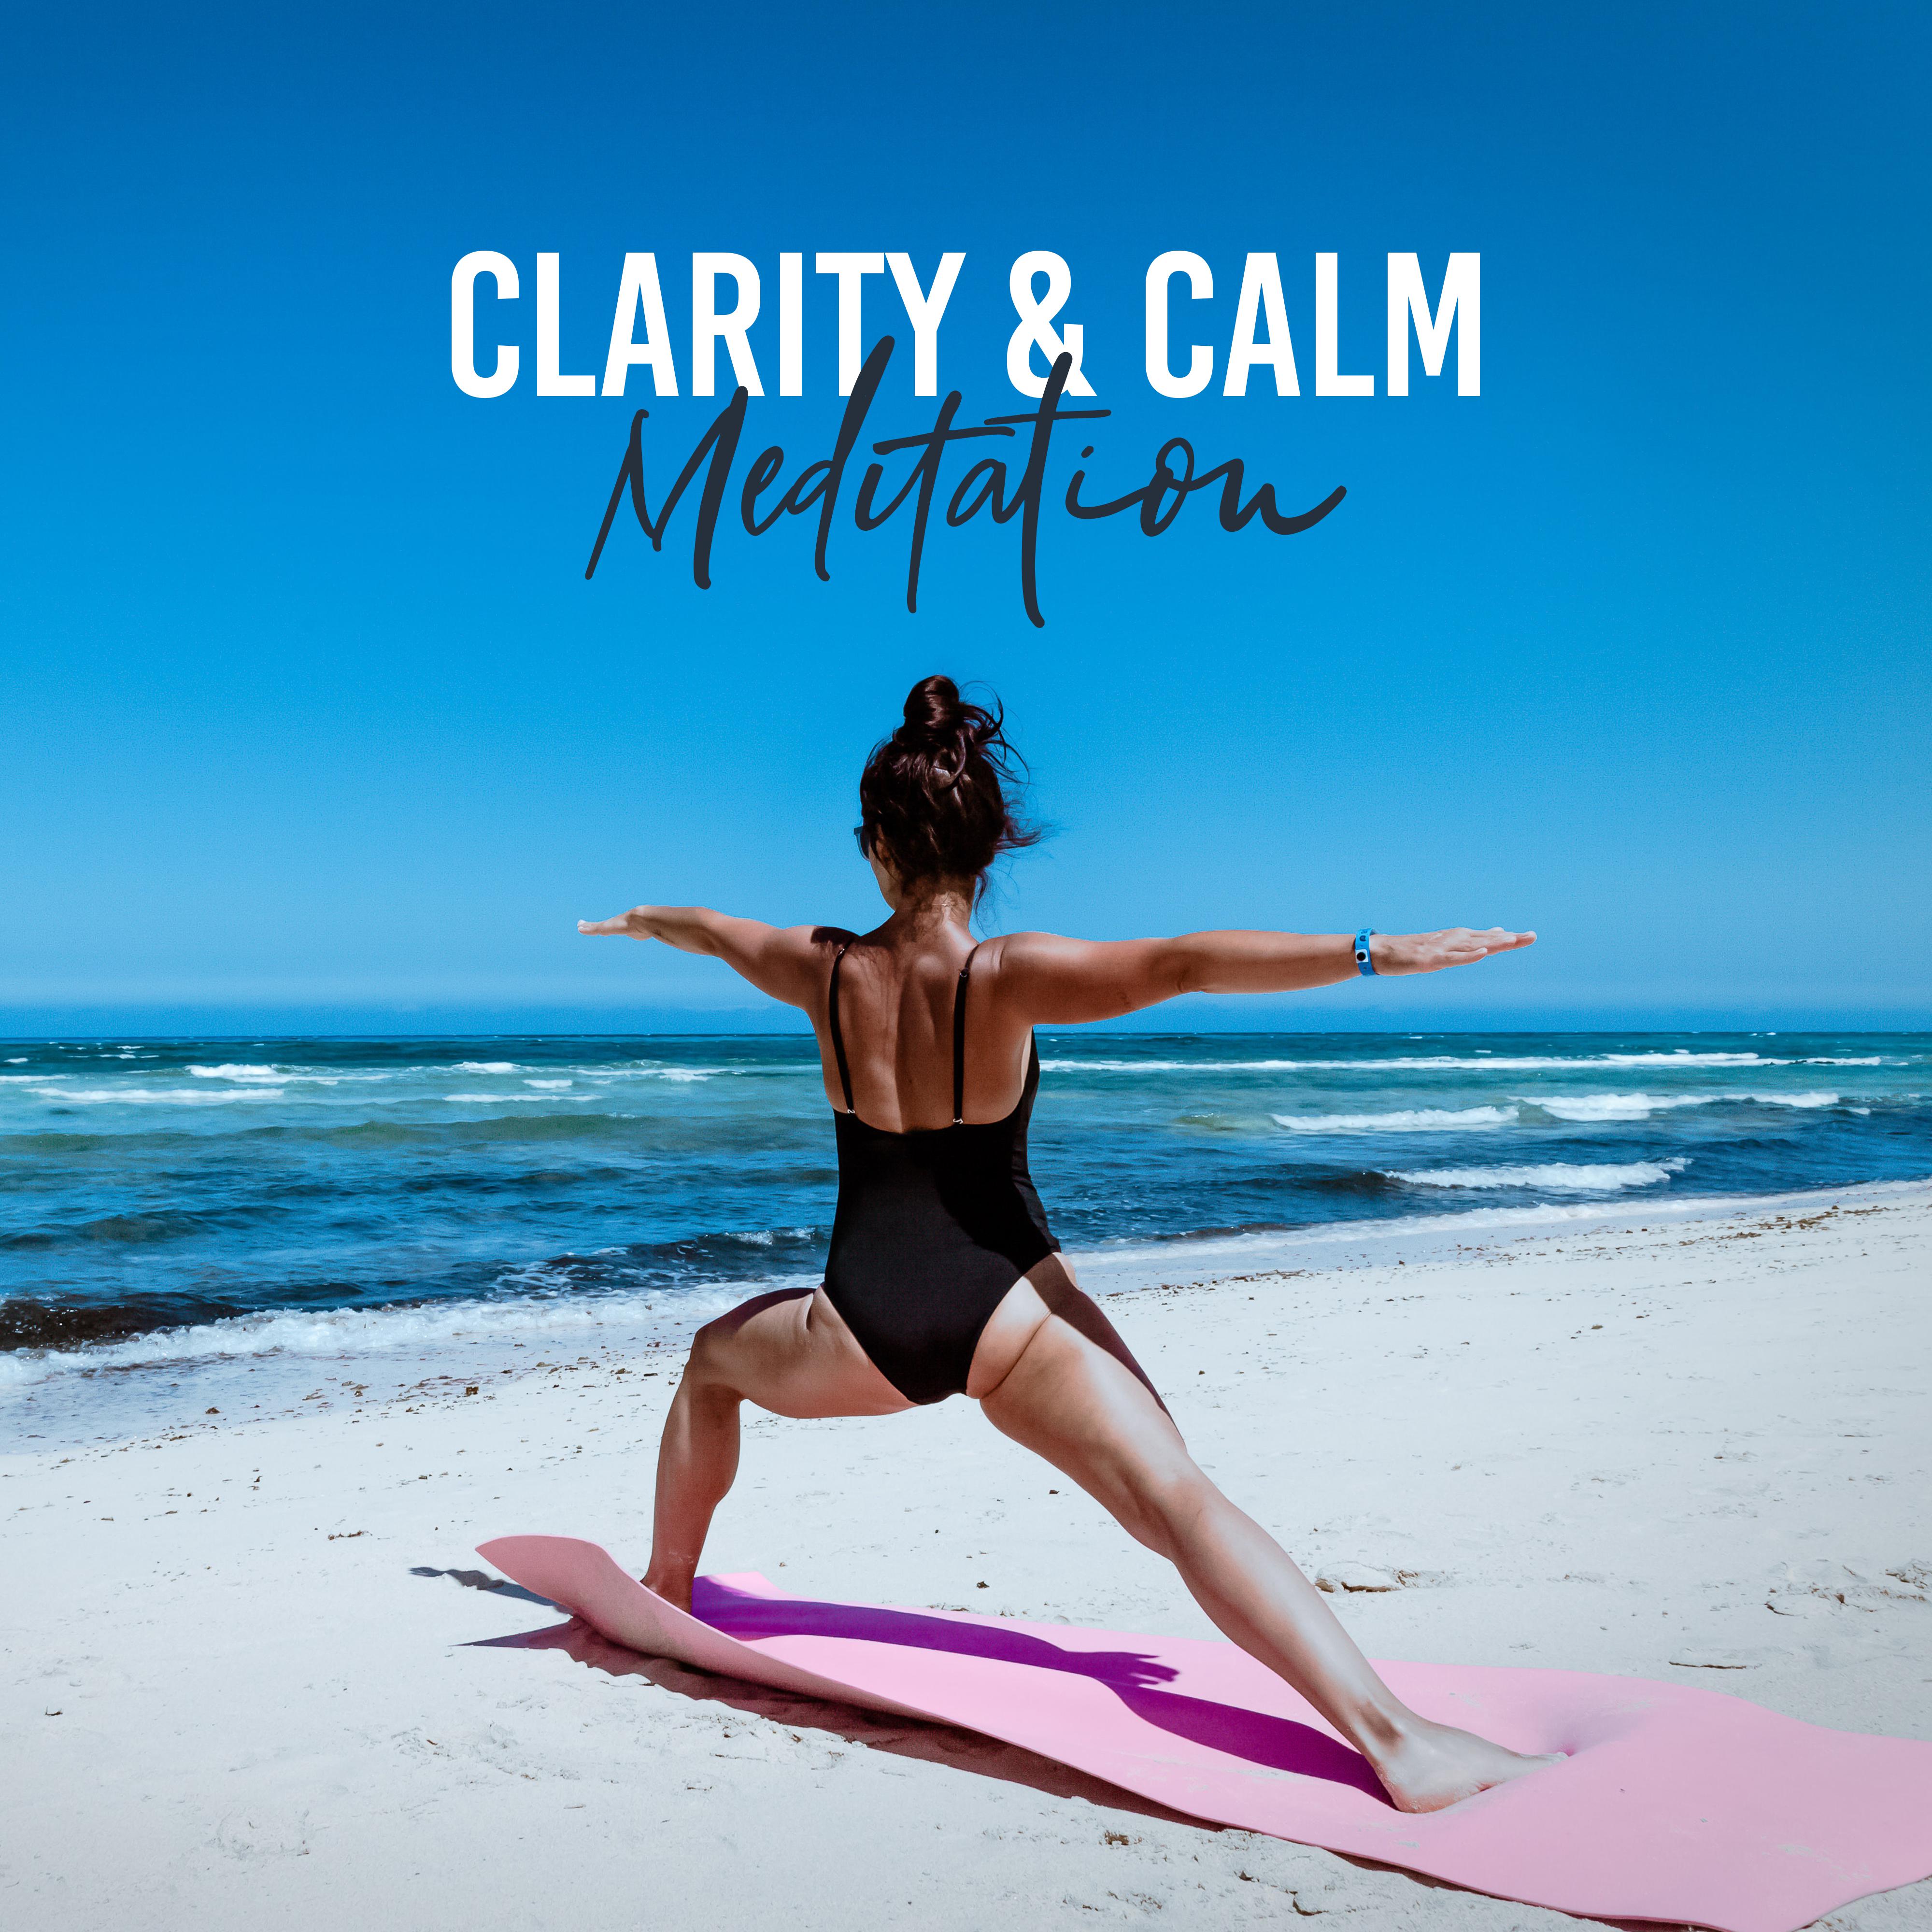 Clarity & Calm Meditation: New Age Ambient 2019 Mix, Music for Yoga & Deep Relax, Spiritual Journey, Mantra Zen